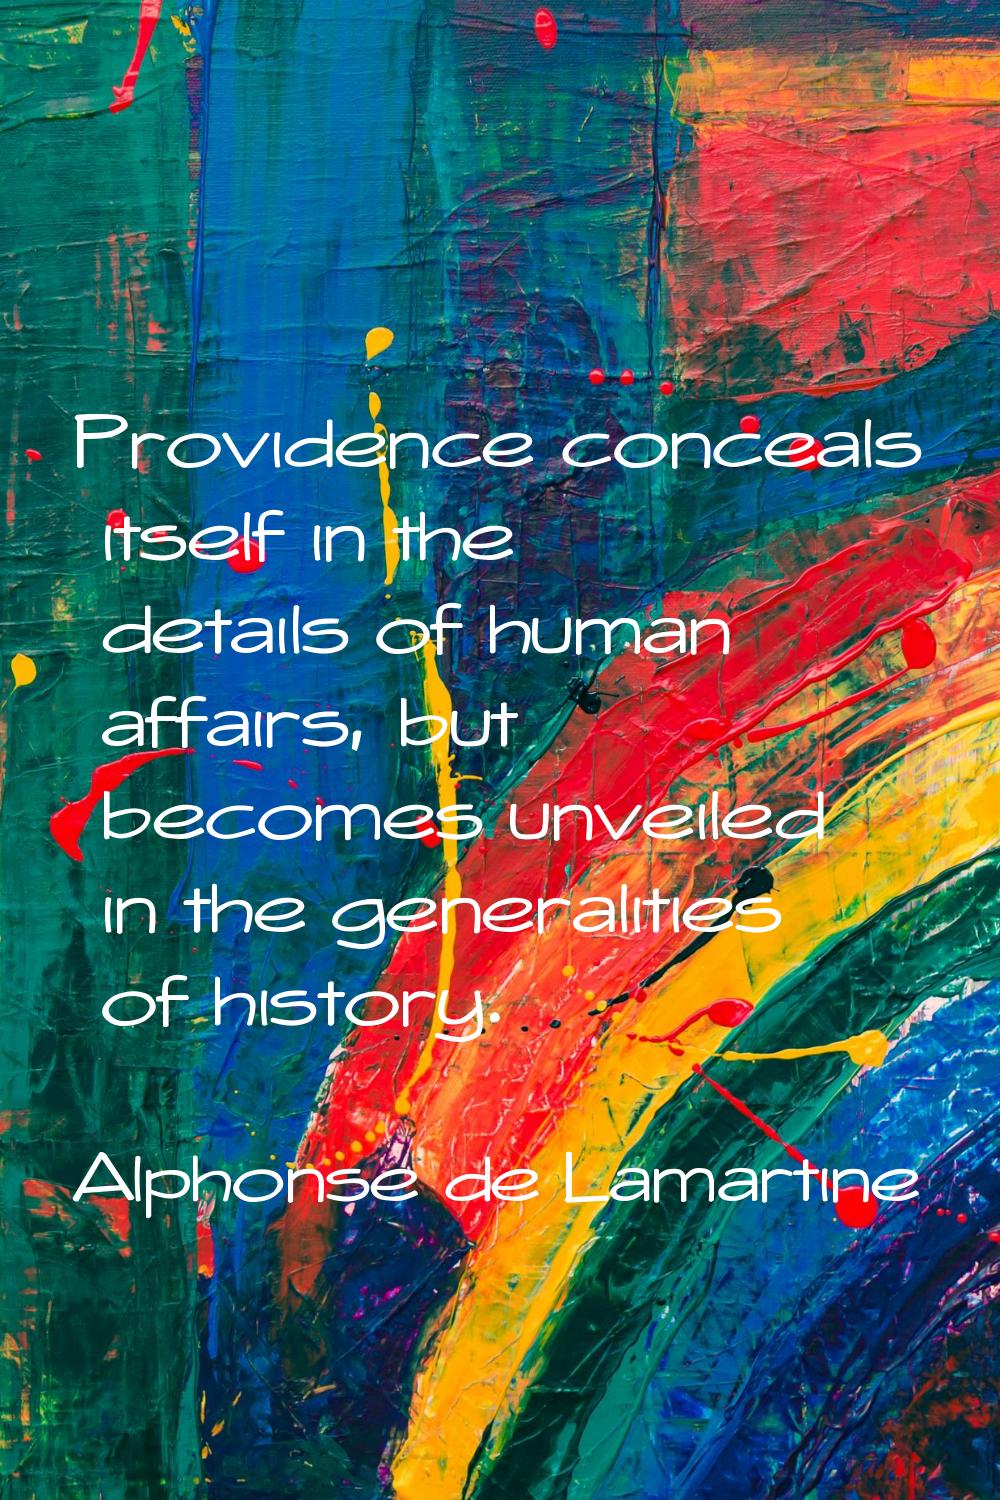 Providence conceals itself in the details of human affairs, but becomes unveiled in the generalitie